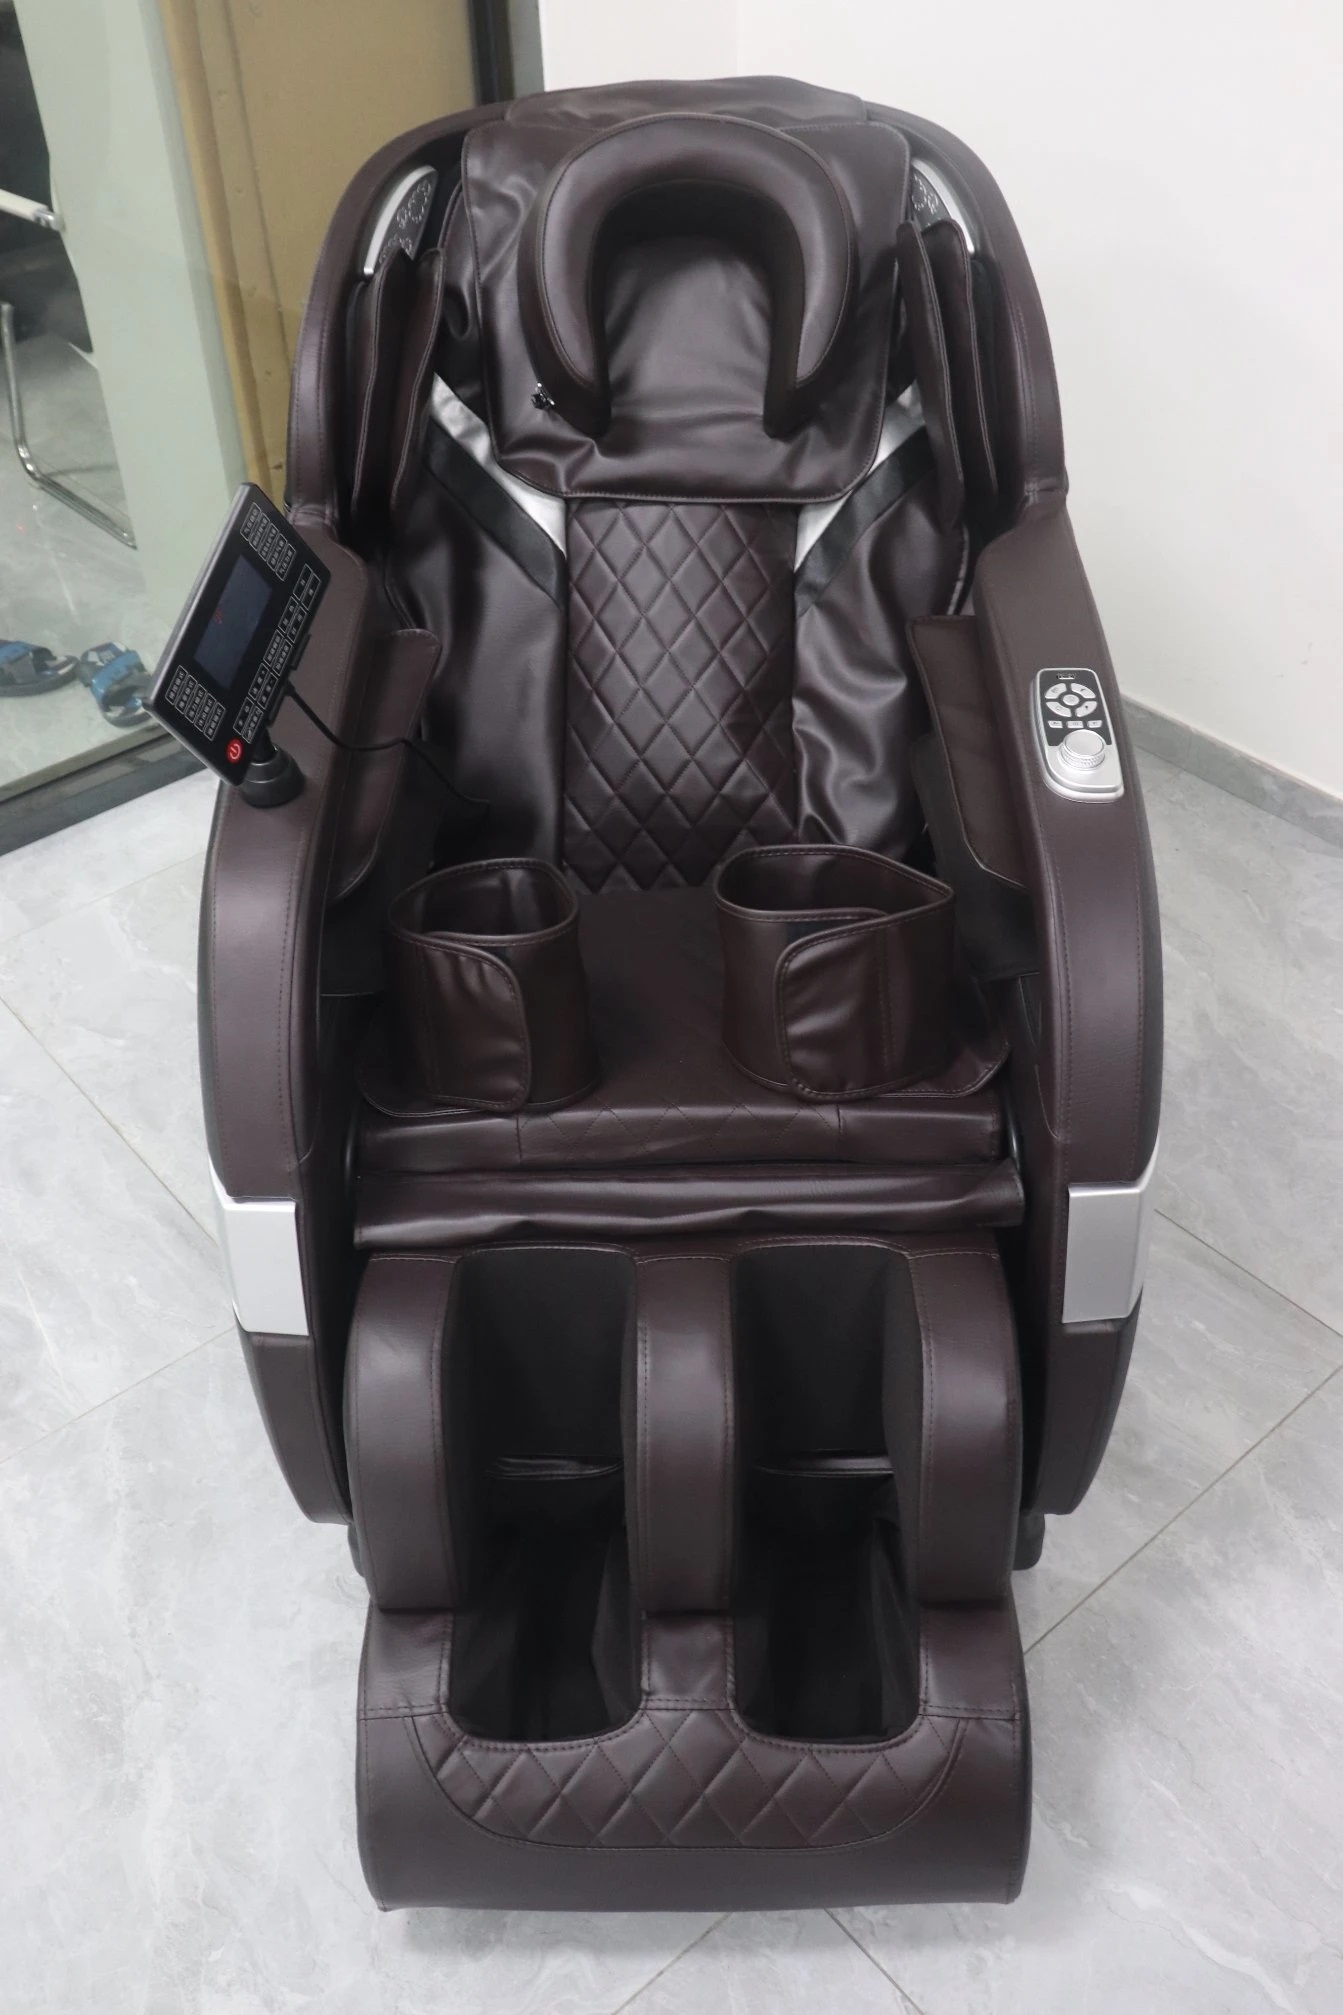 Full Body Royal Luxury Massage chair with LCD Control panel